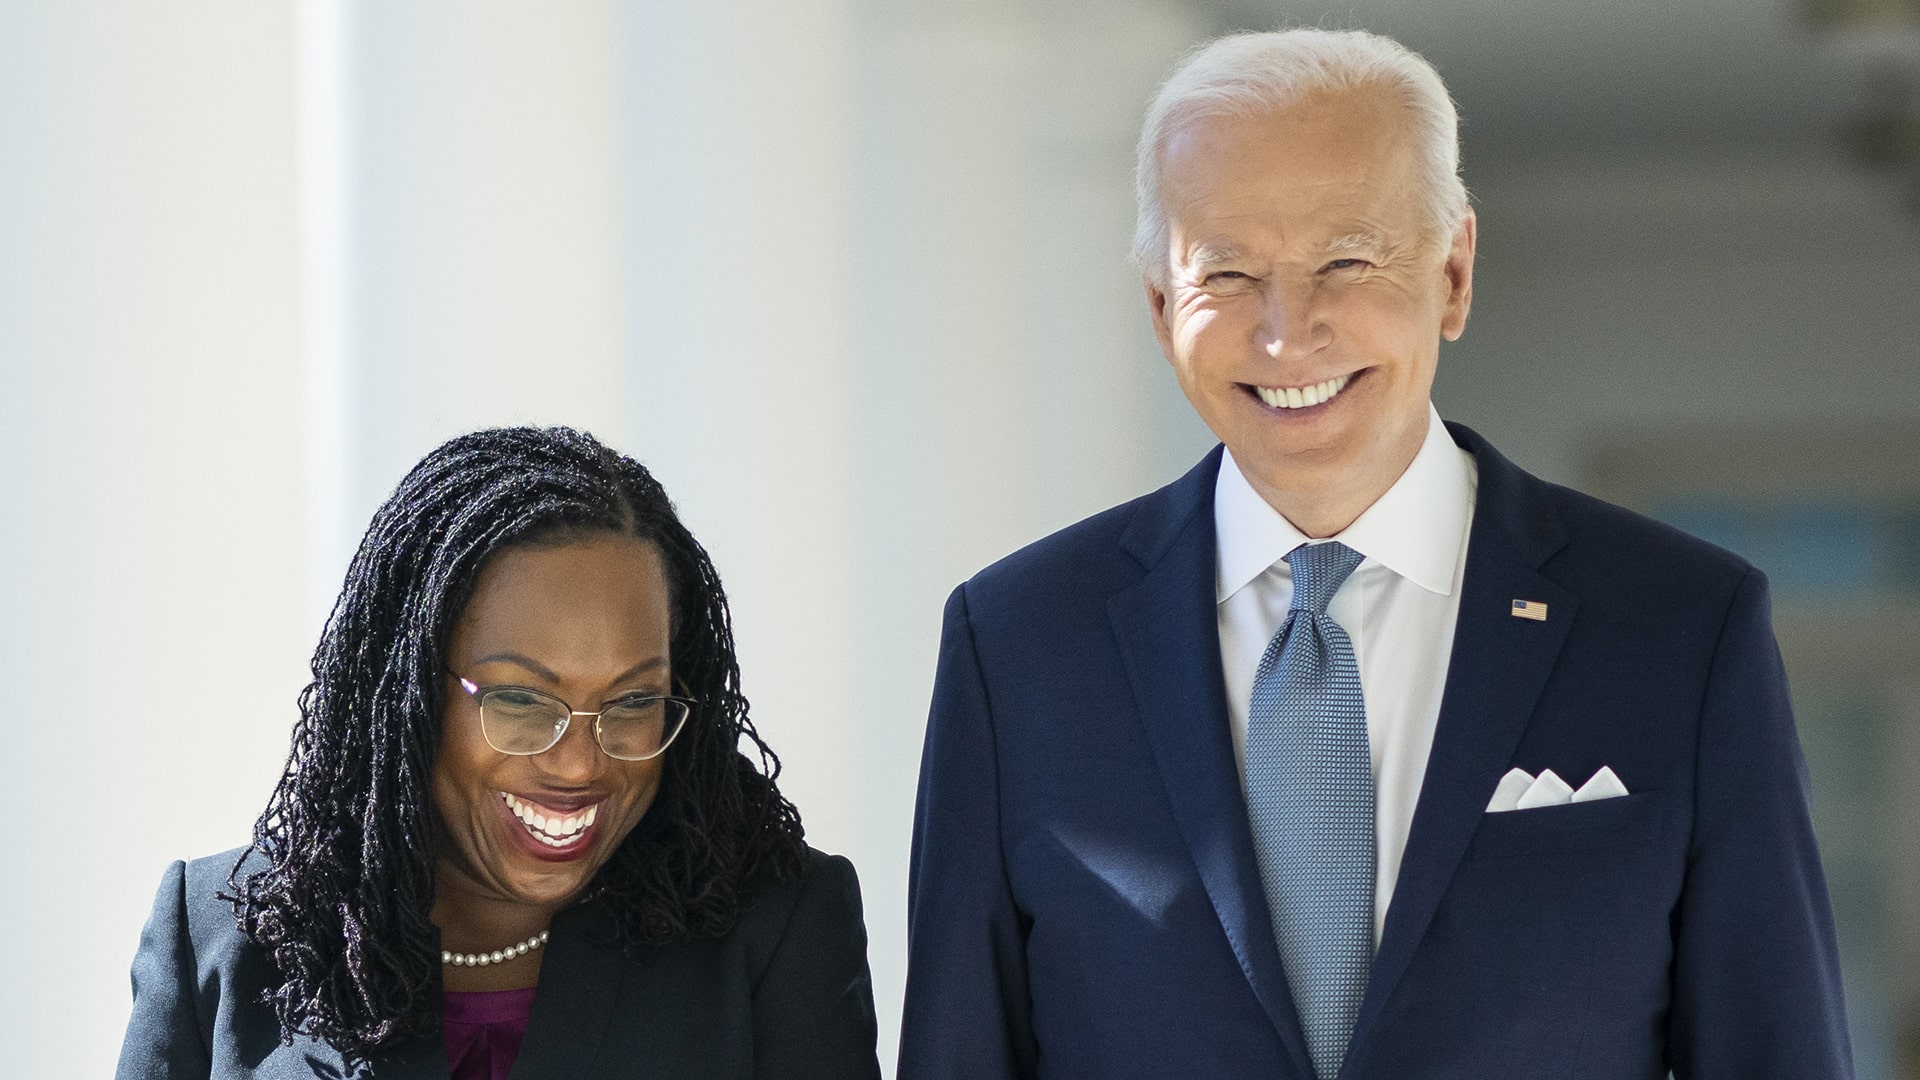 Joe Biden walks with Judge Ketanji Brown Jackson along the West Colonnade of the White House, Friday, February 25, 2022, prior to announcing her nomination to the U.S. Supreme Court. (Official White House Photo by Adam Schultz)